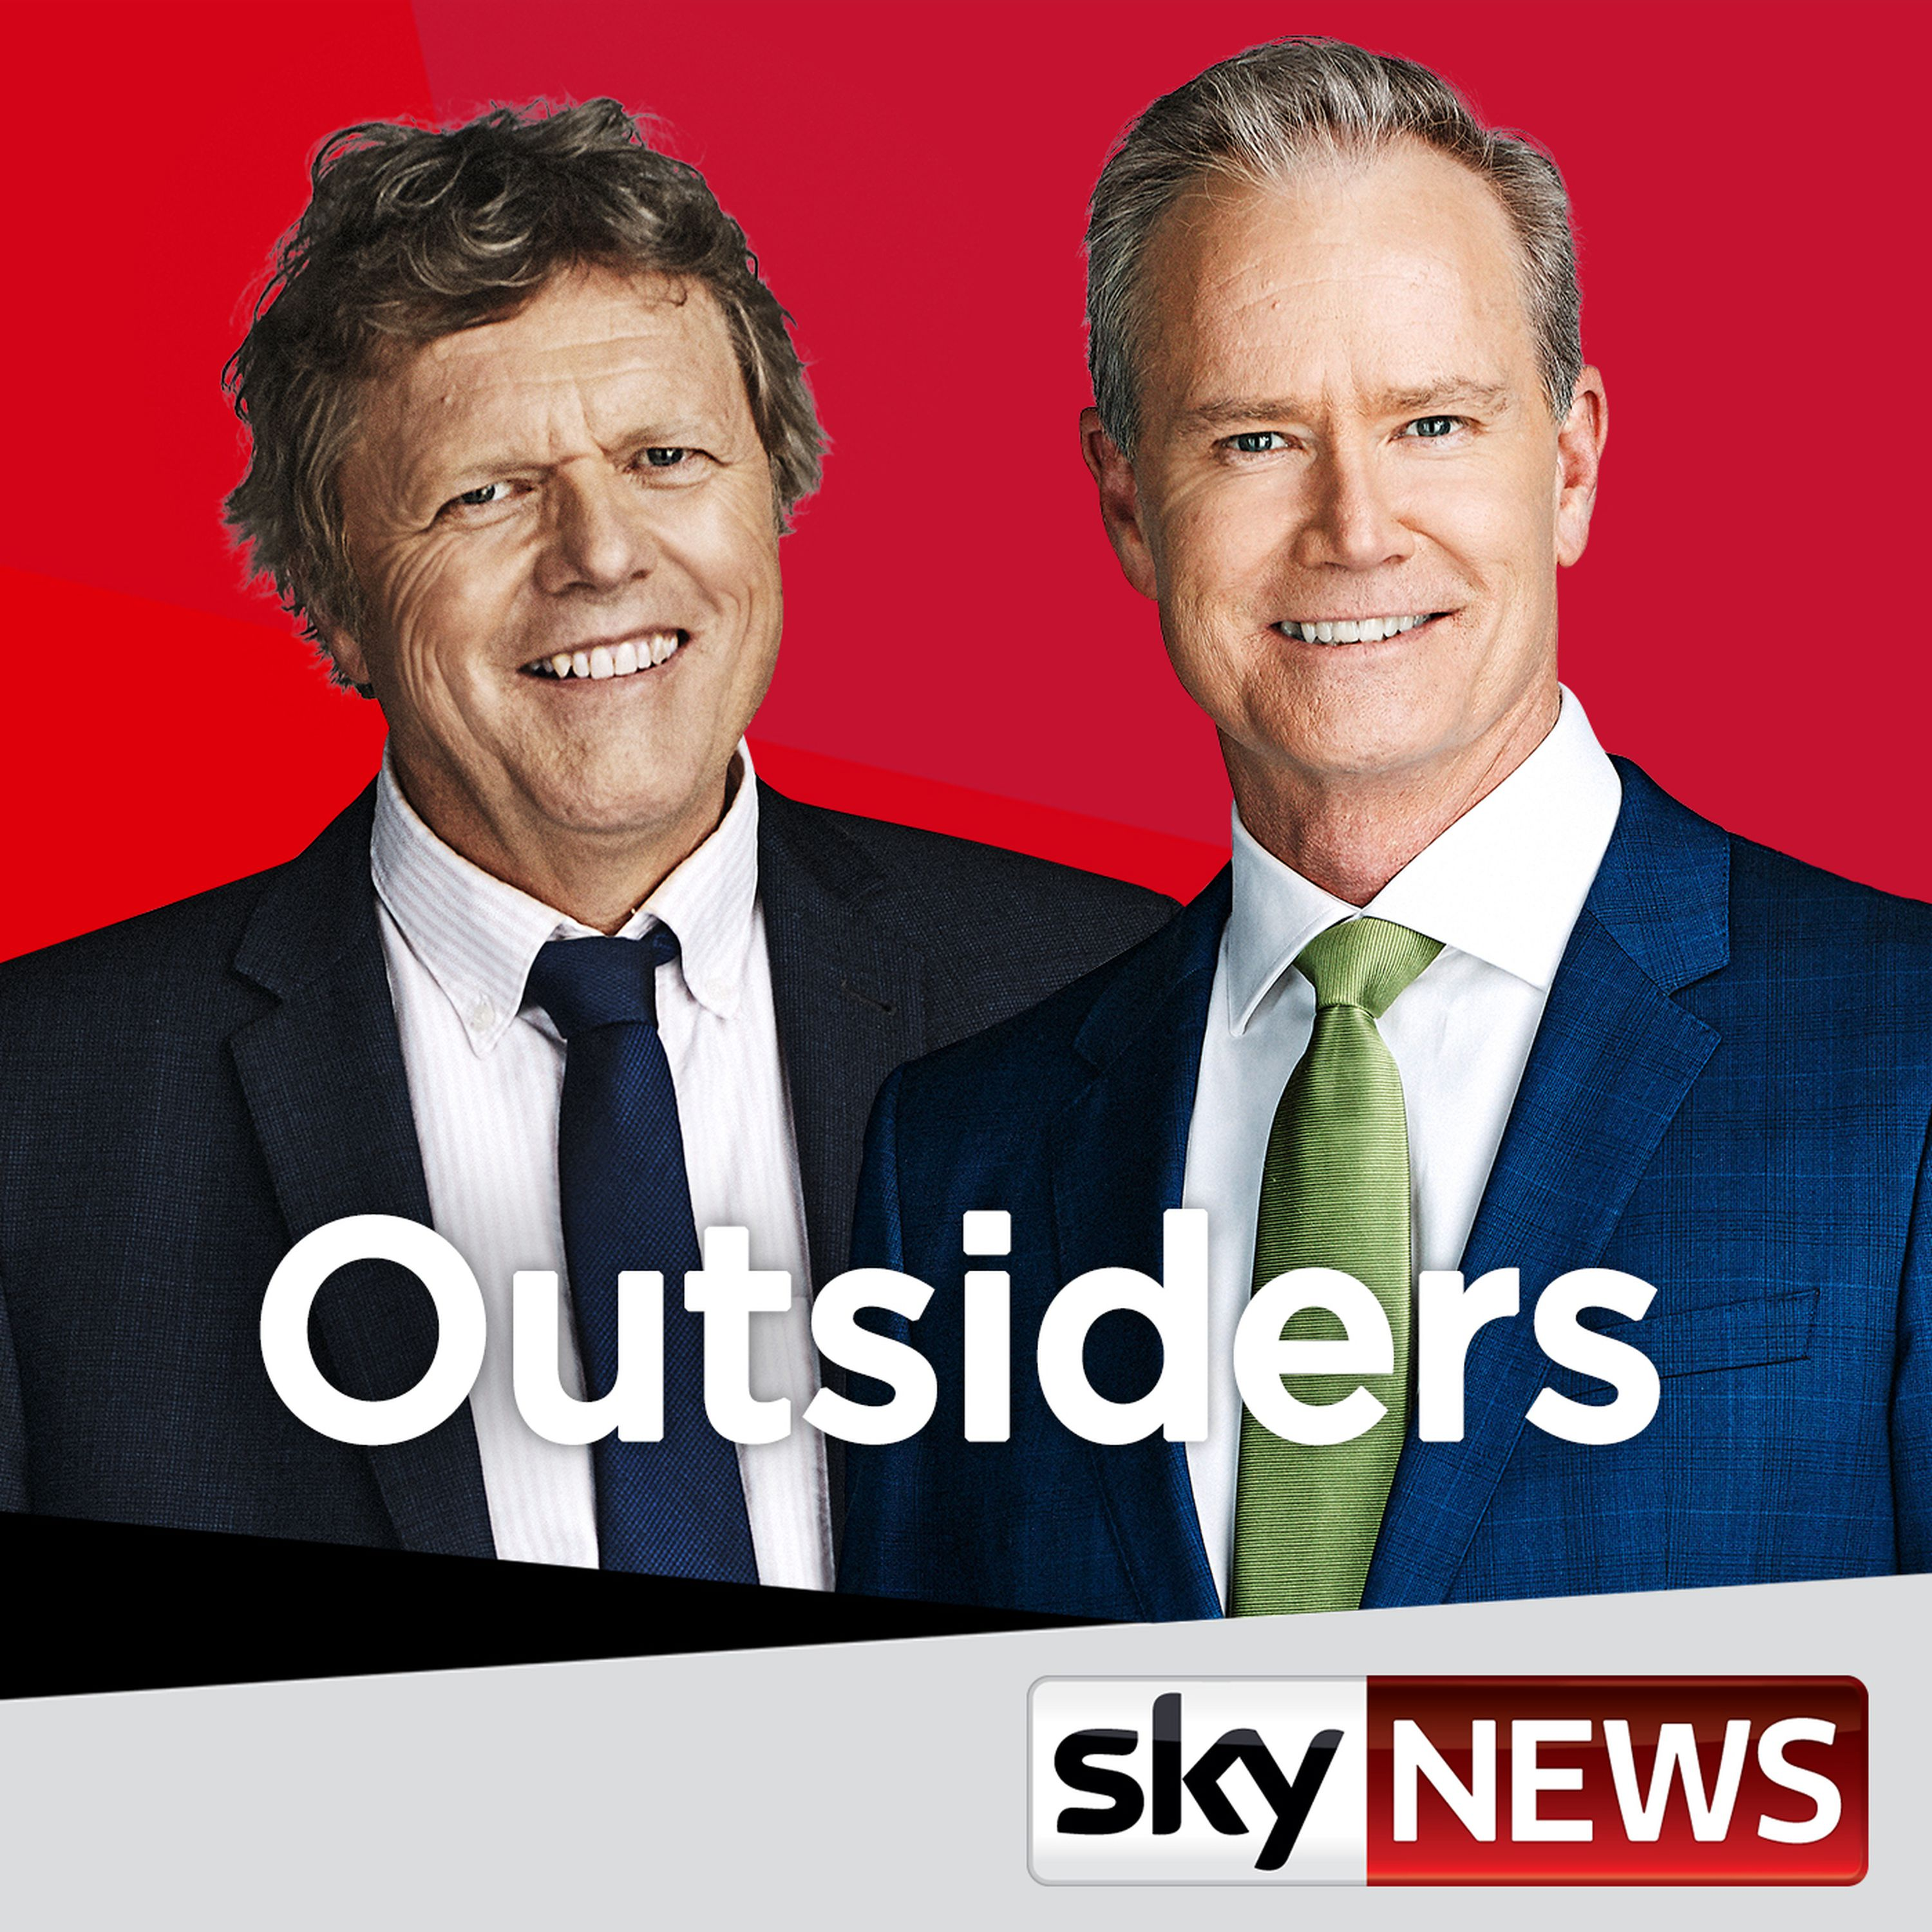 Outsiders, Tuesday 16th October